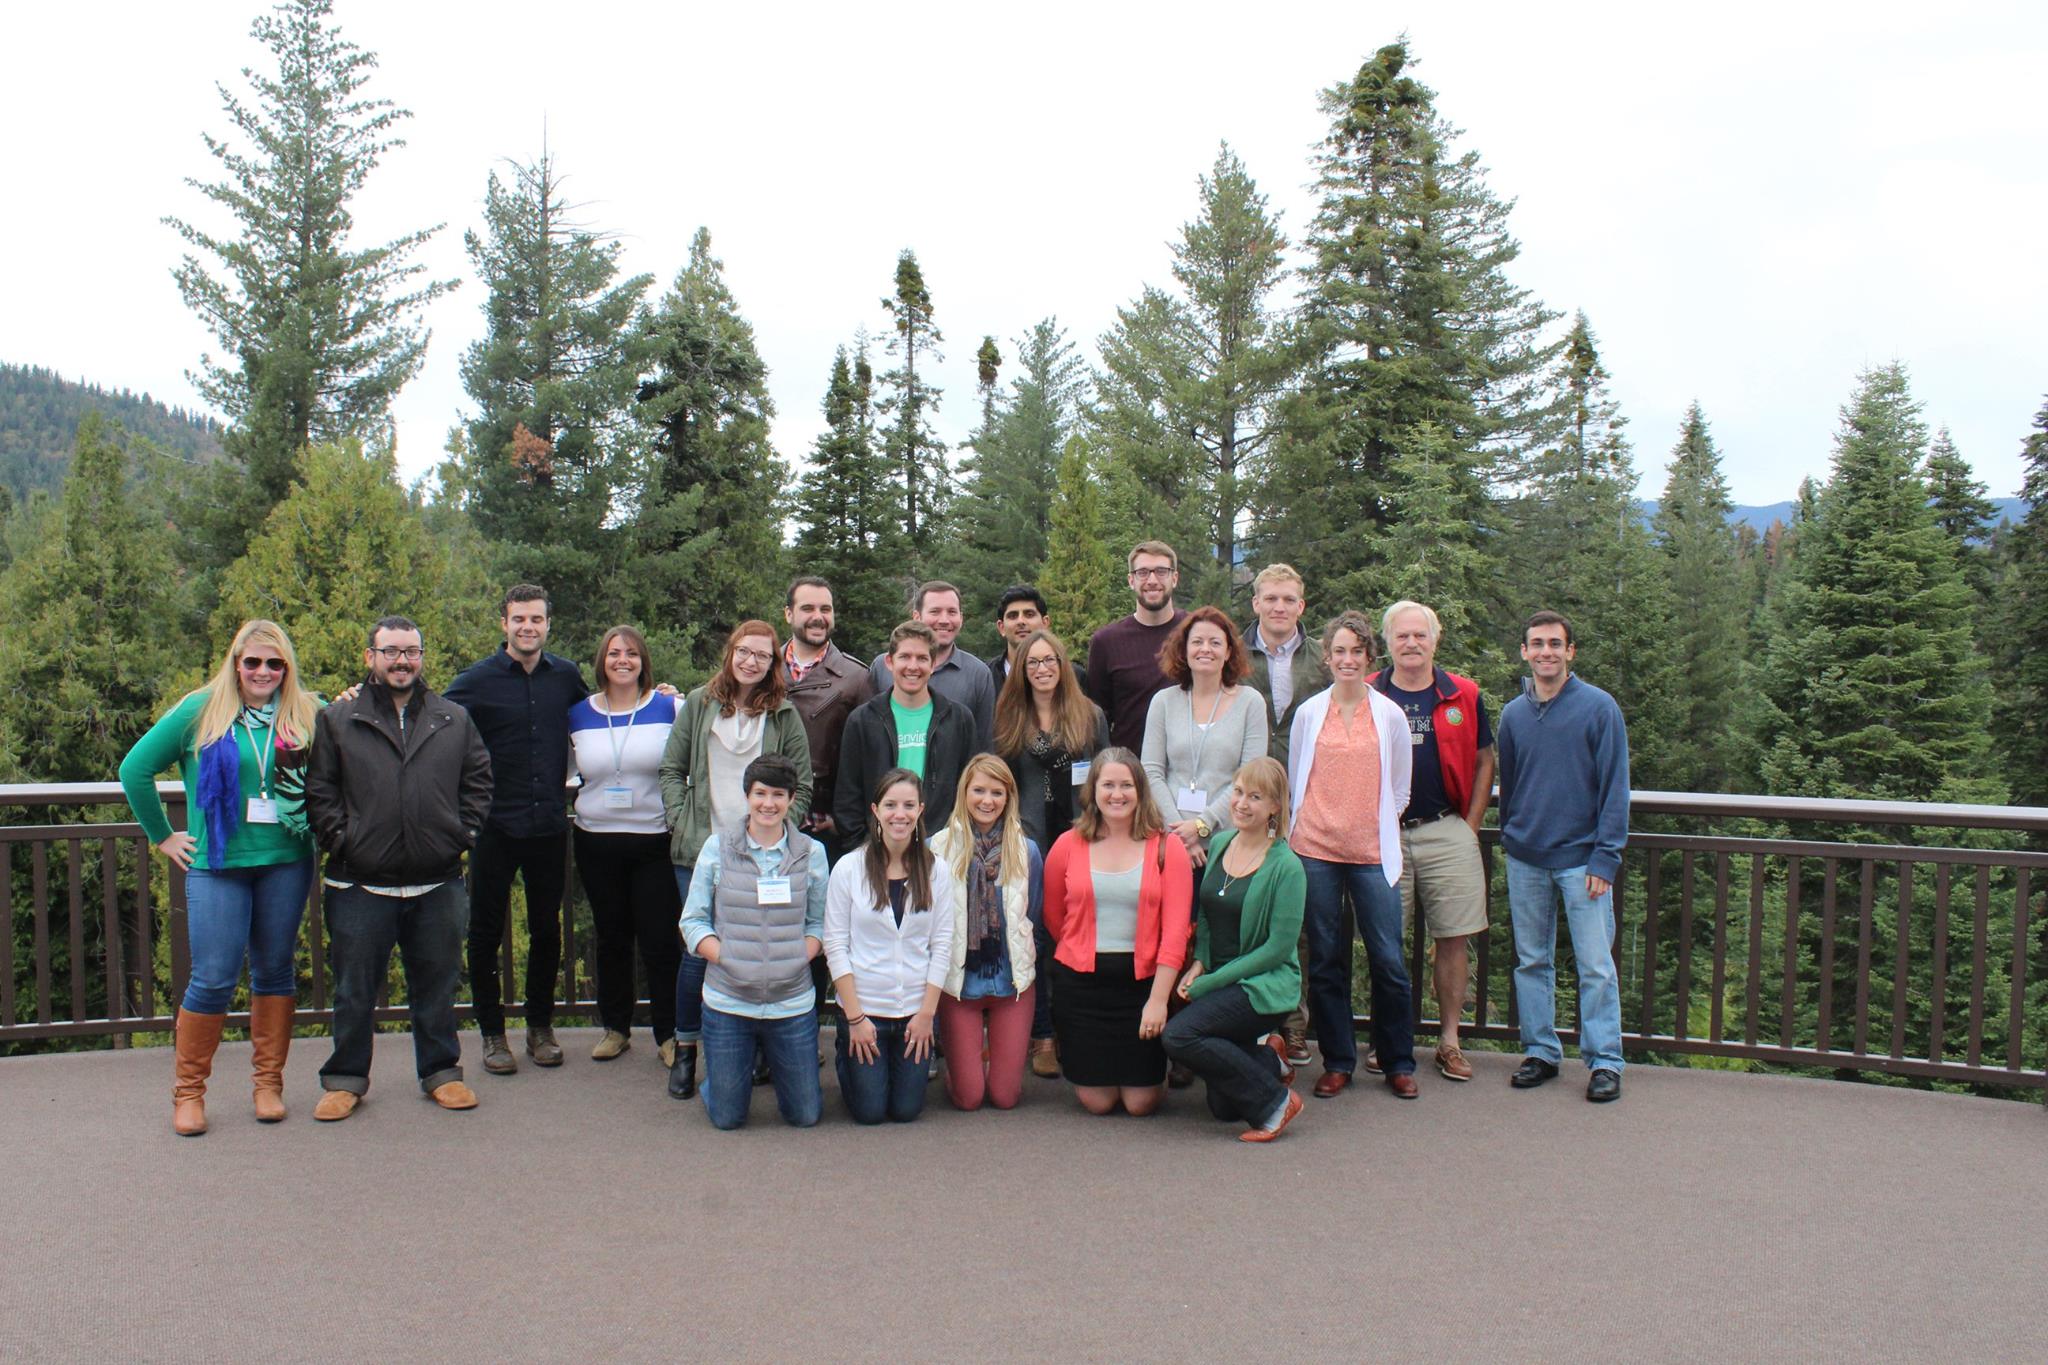 Yosemite Conference Attendees, 2015